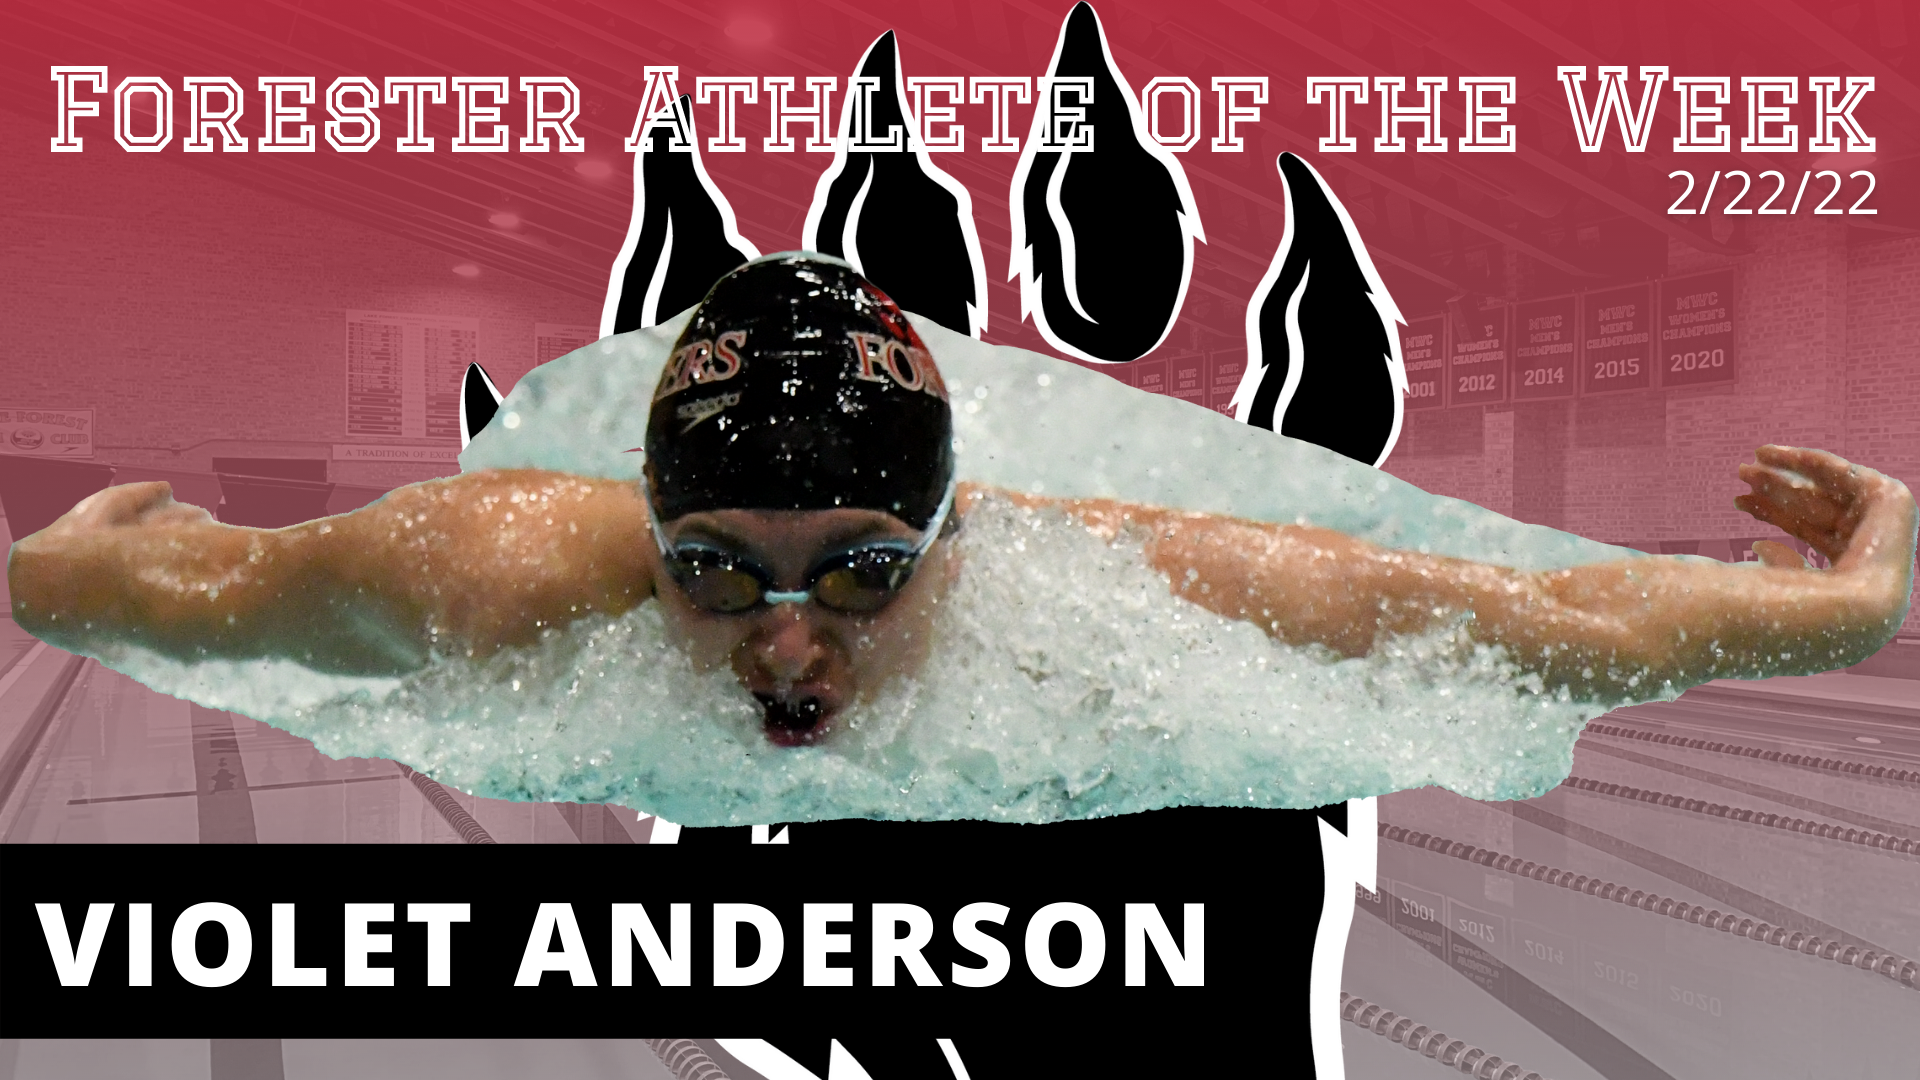 Violet Anderson Named Women's Forester Athlete of the Week